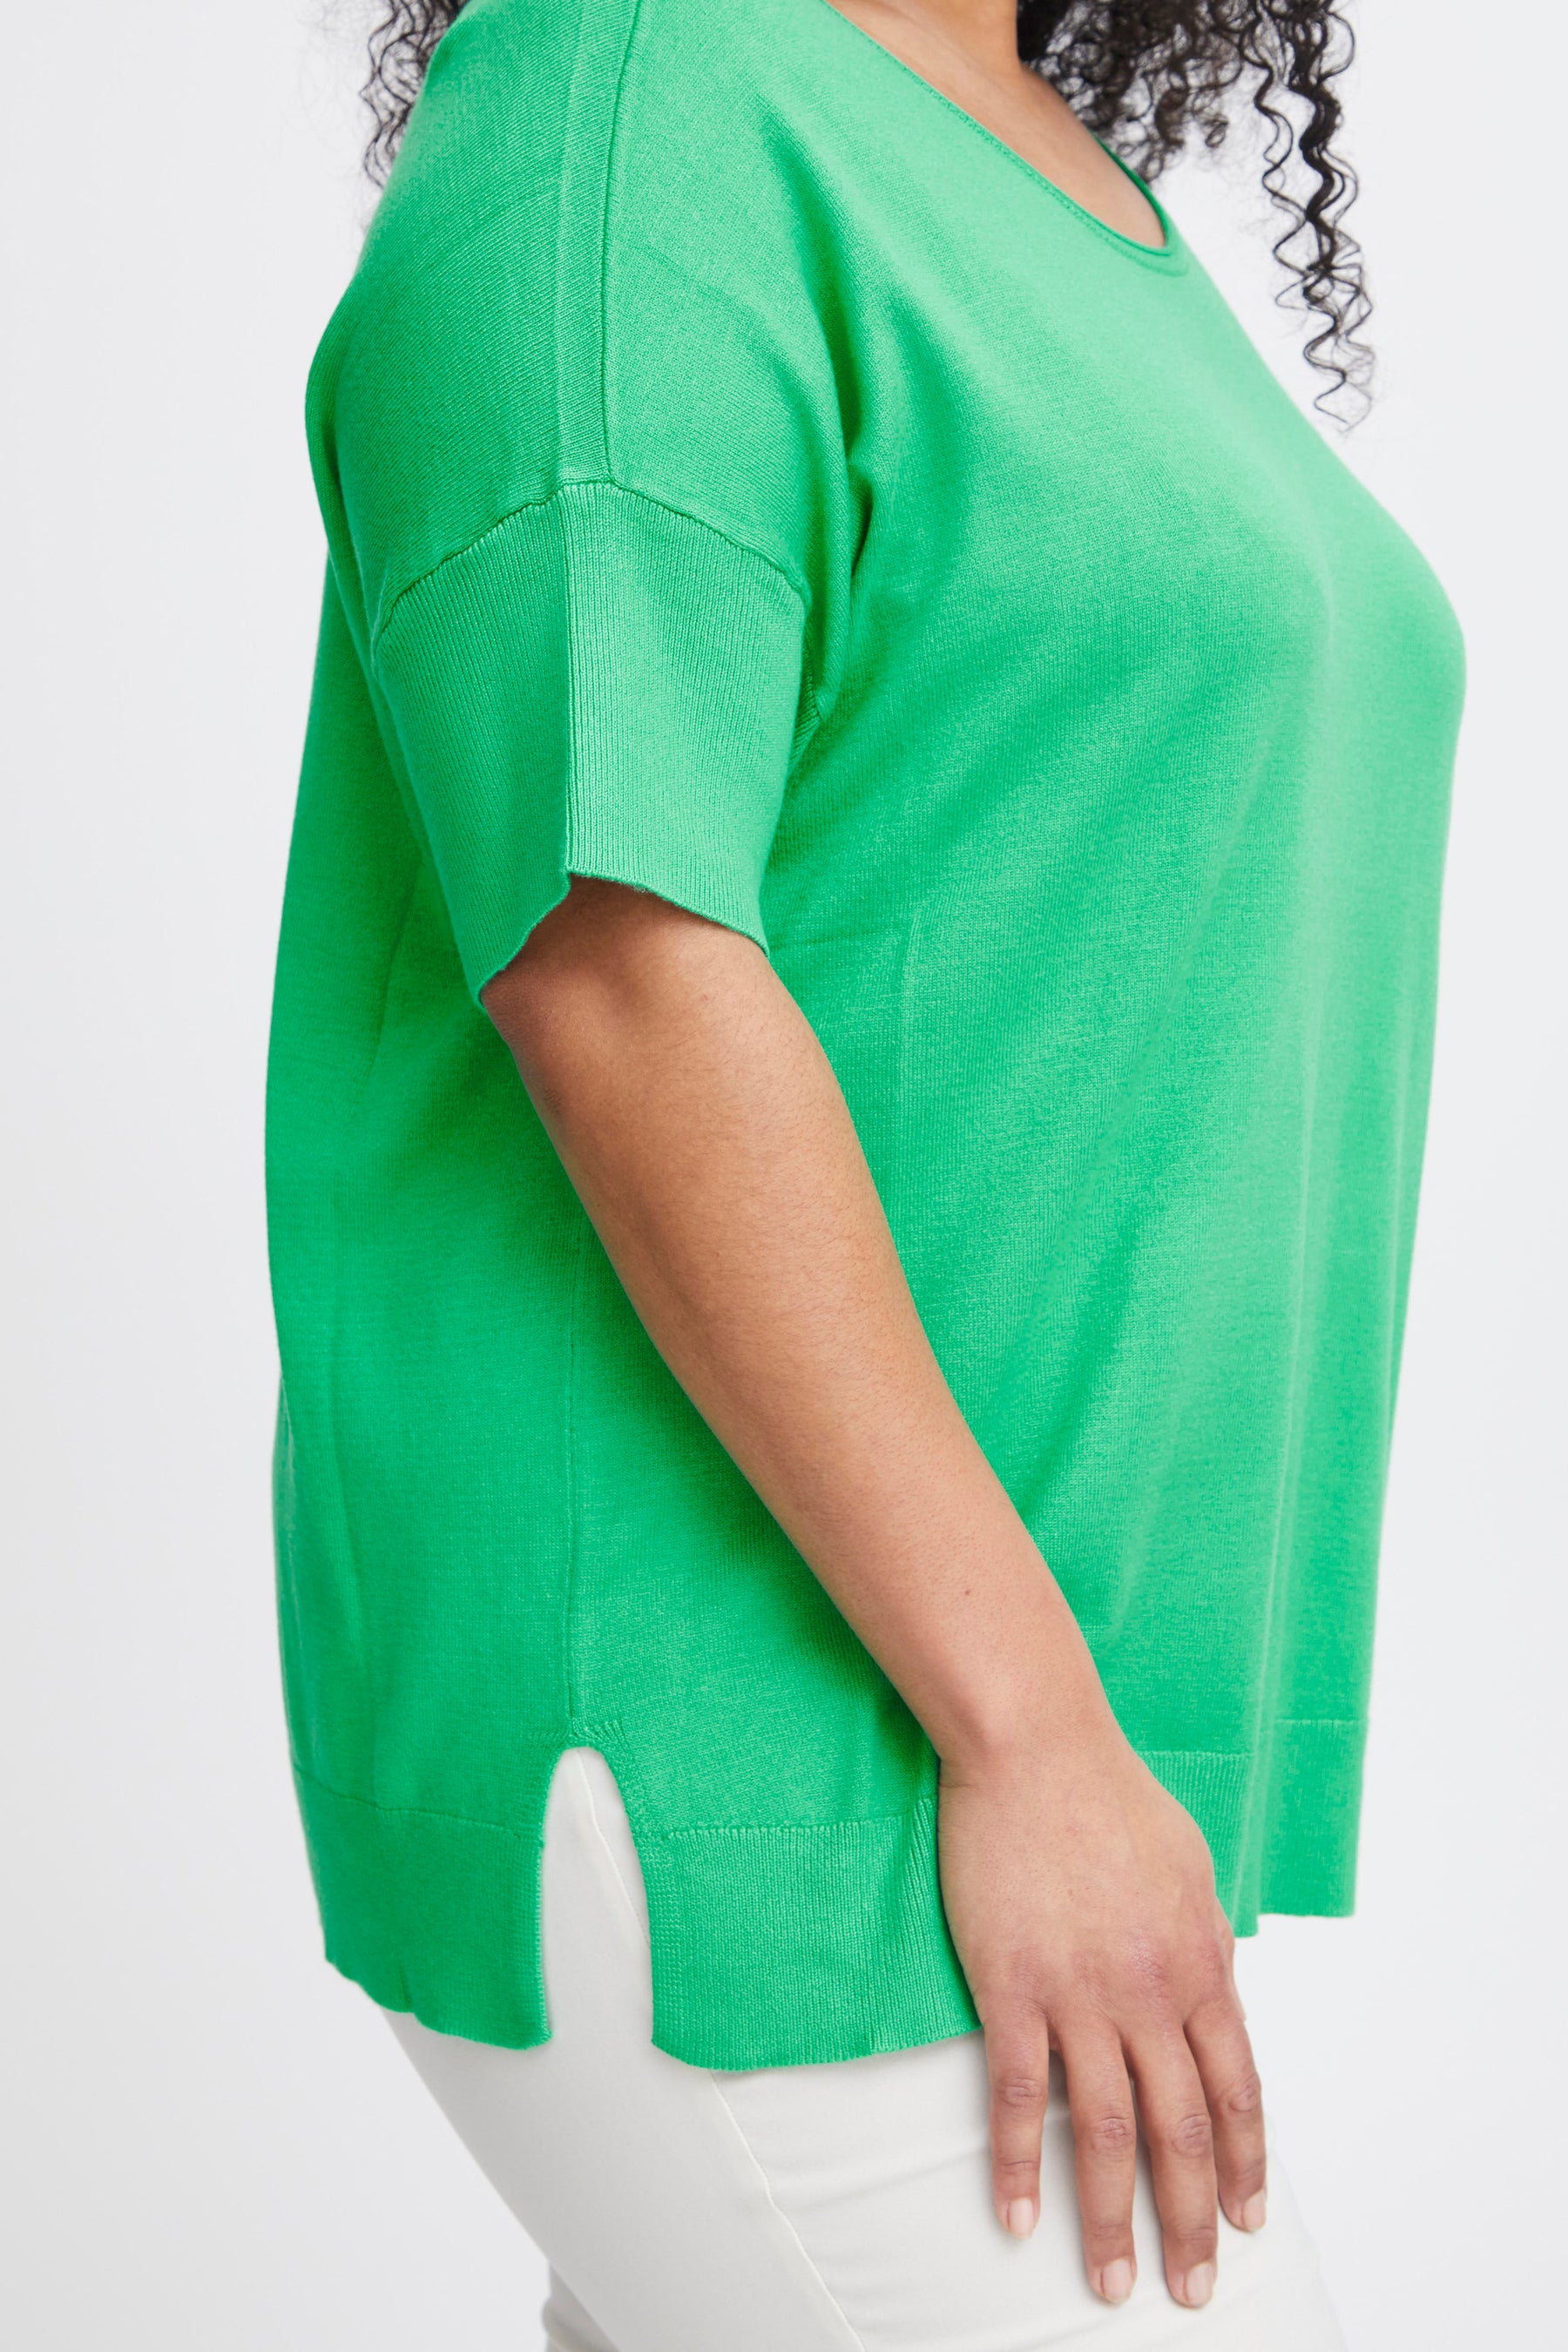 Simple Wish Clia Knitted Top in Green